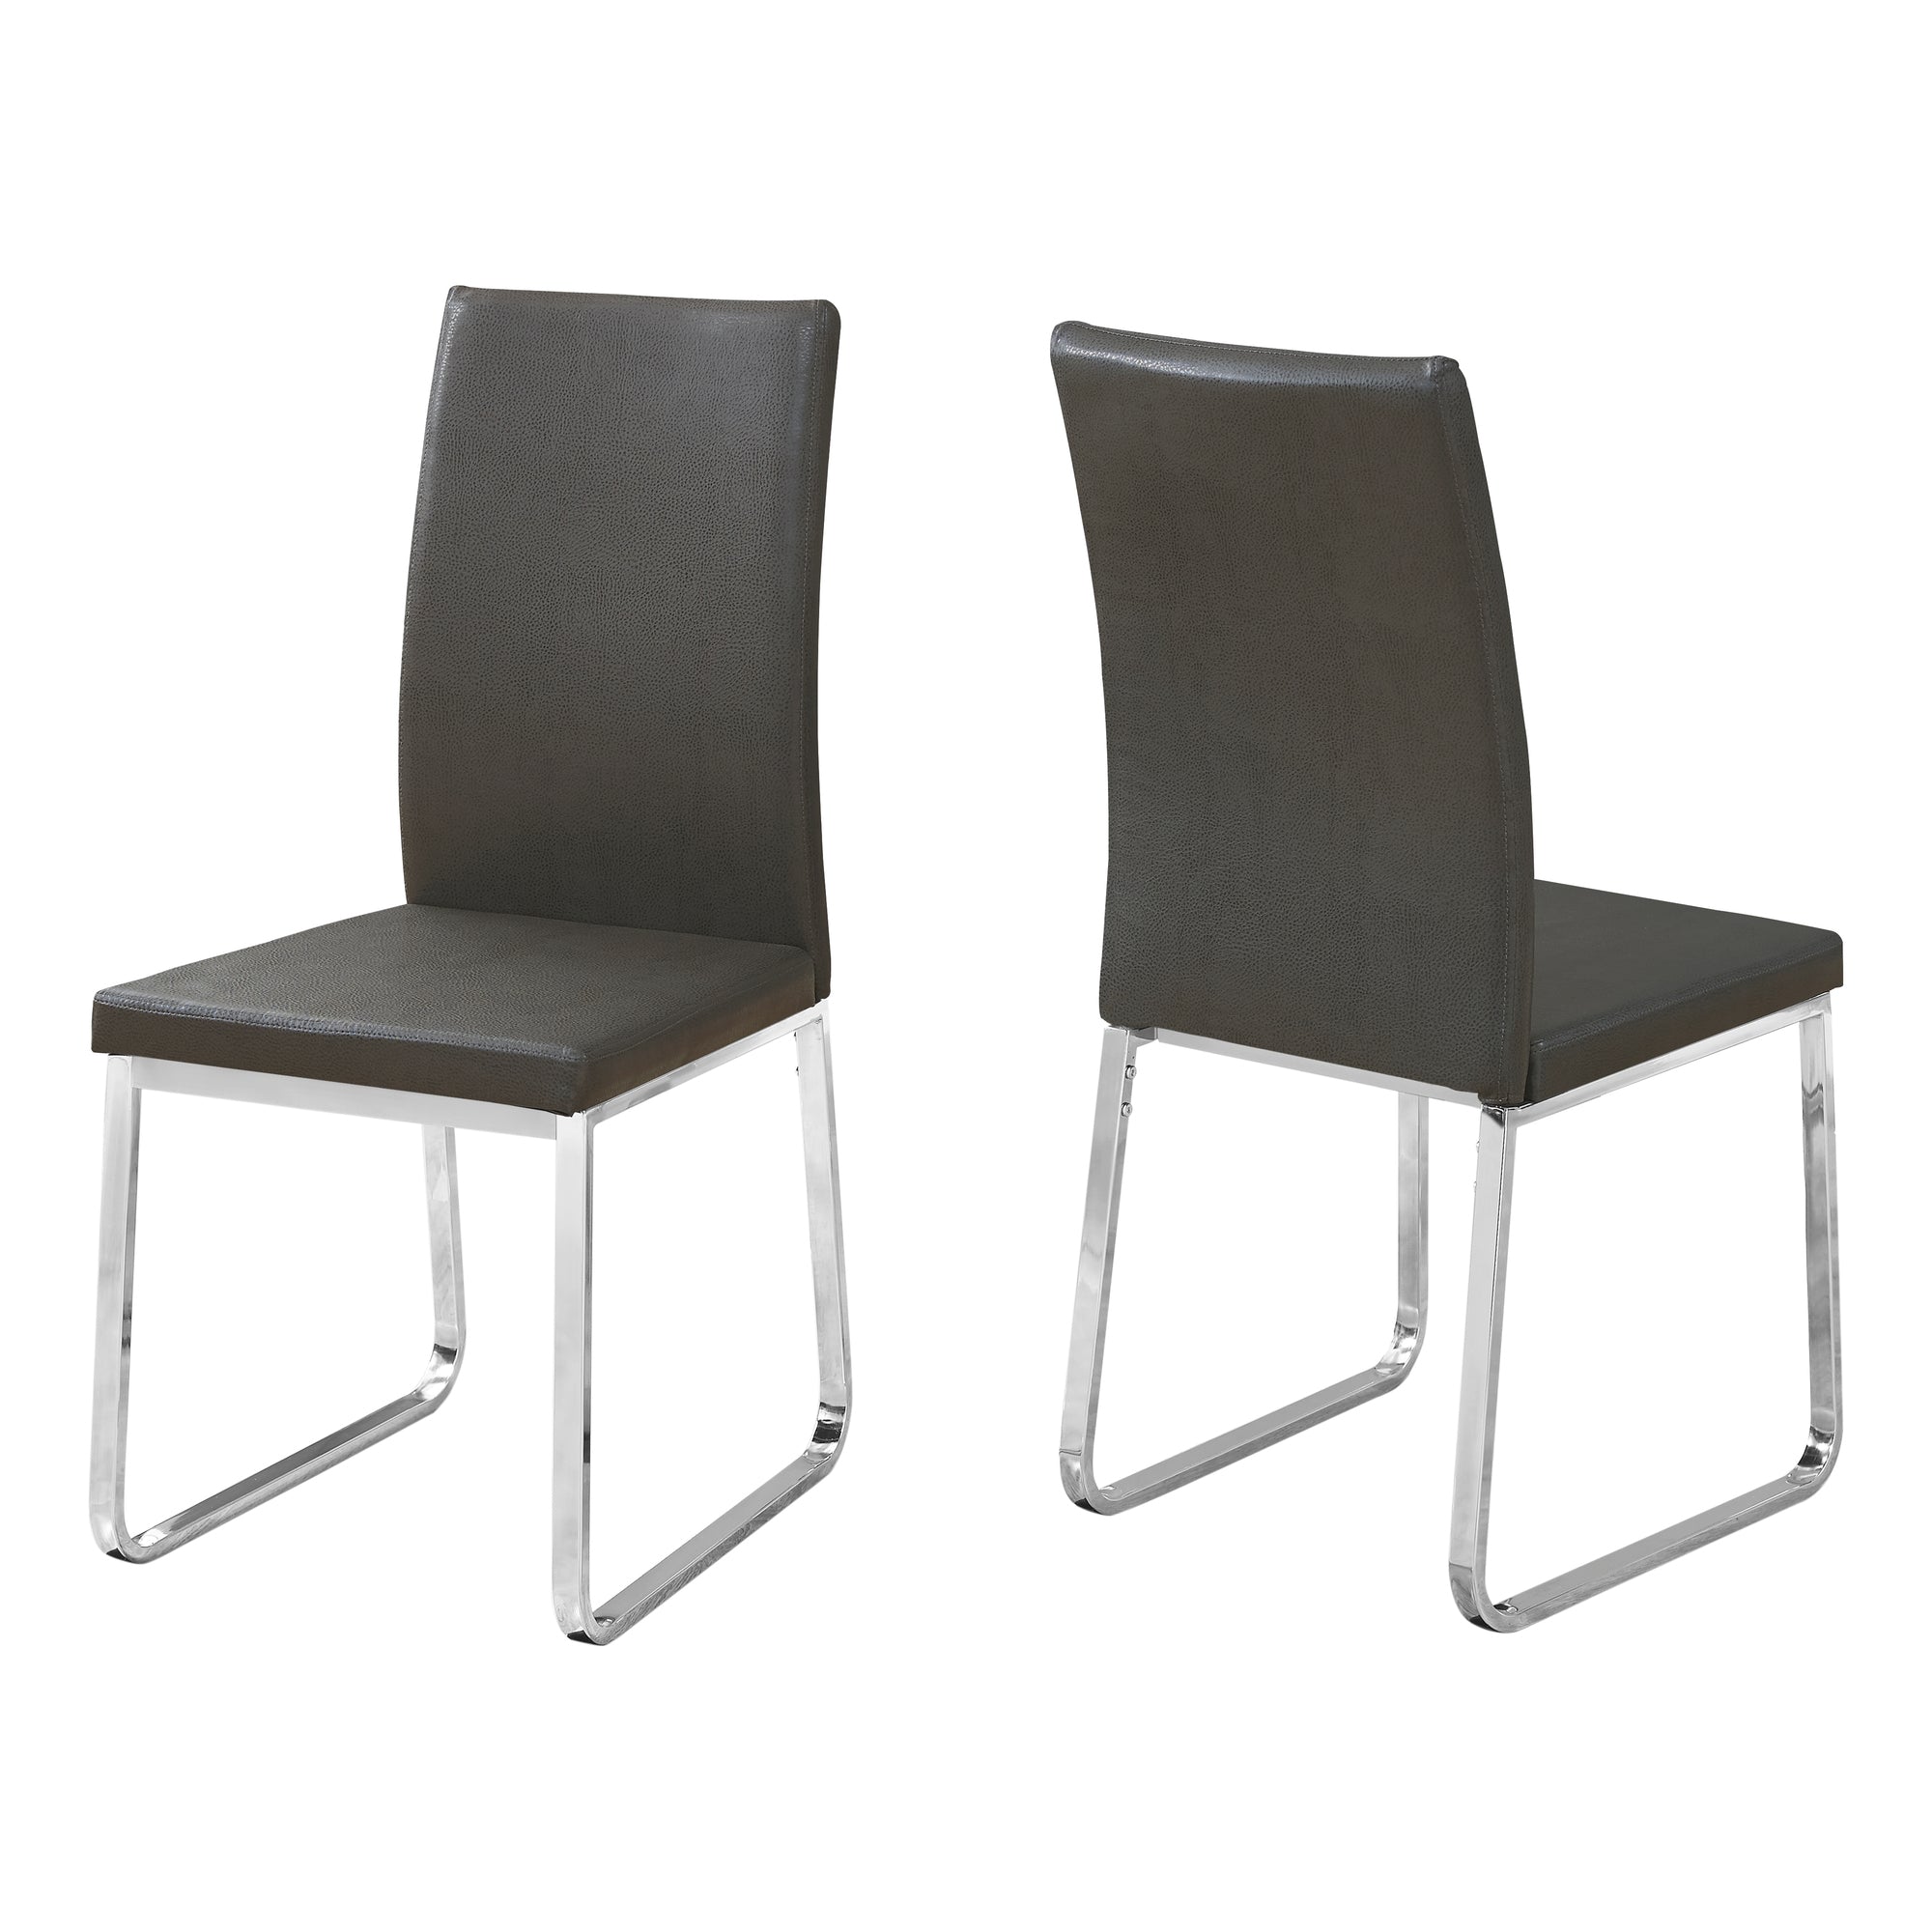 Mclenagan Modern Dining Chair With Chrome Finish Legs (Set of 2 - Grey)